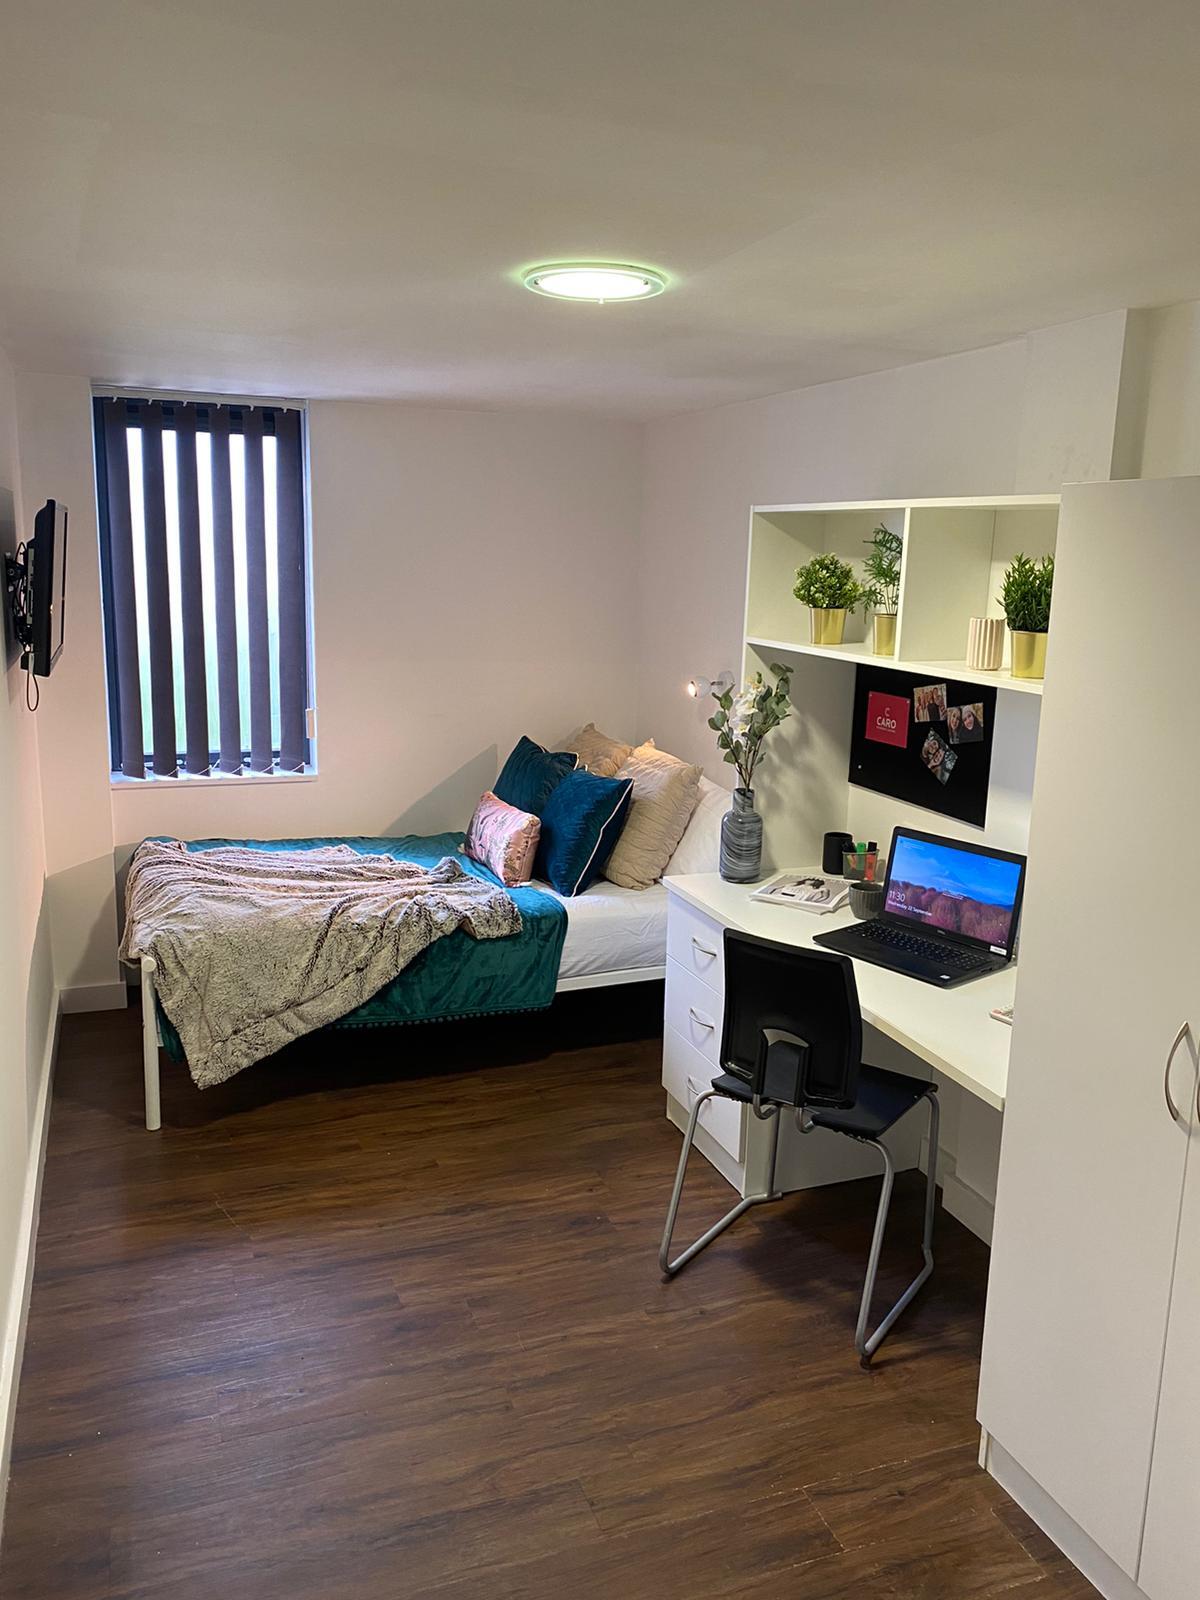 Bed City Point - Caro Lettings